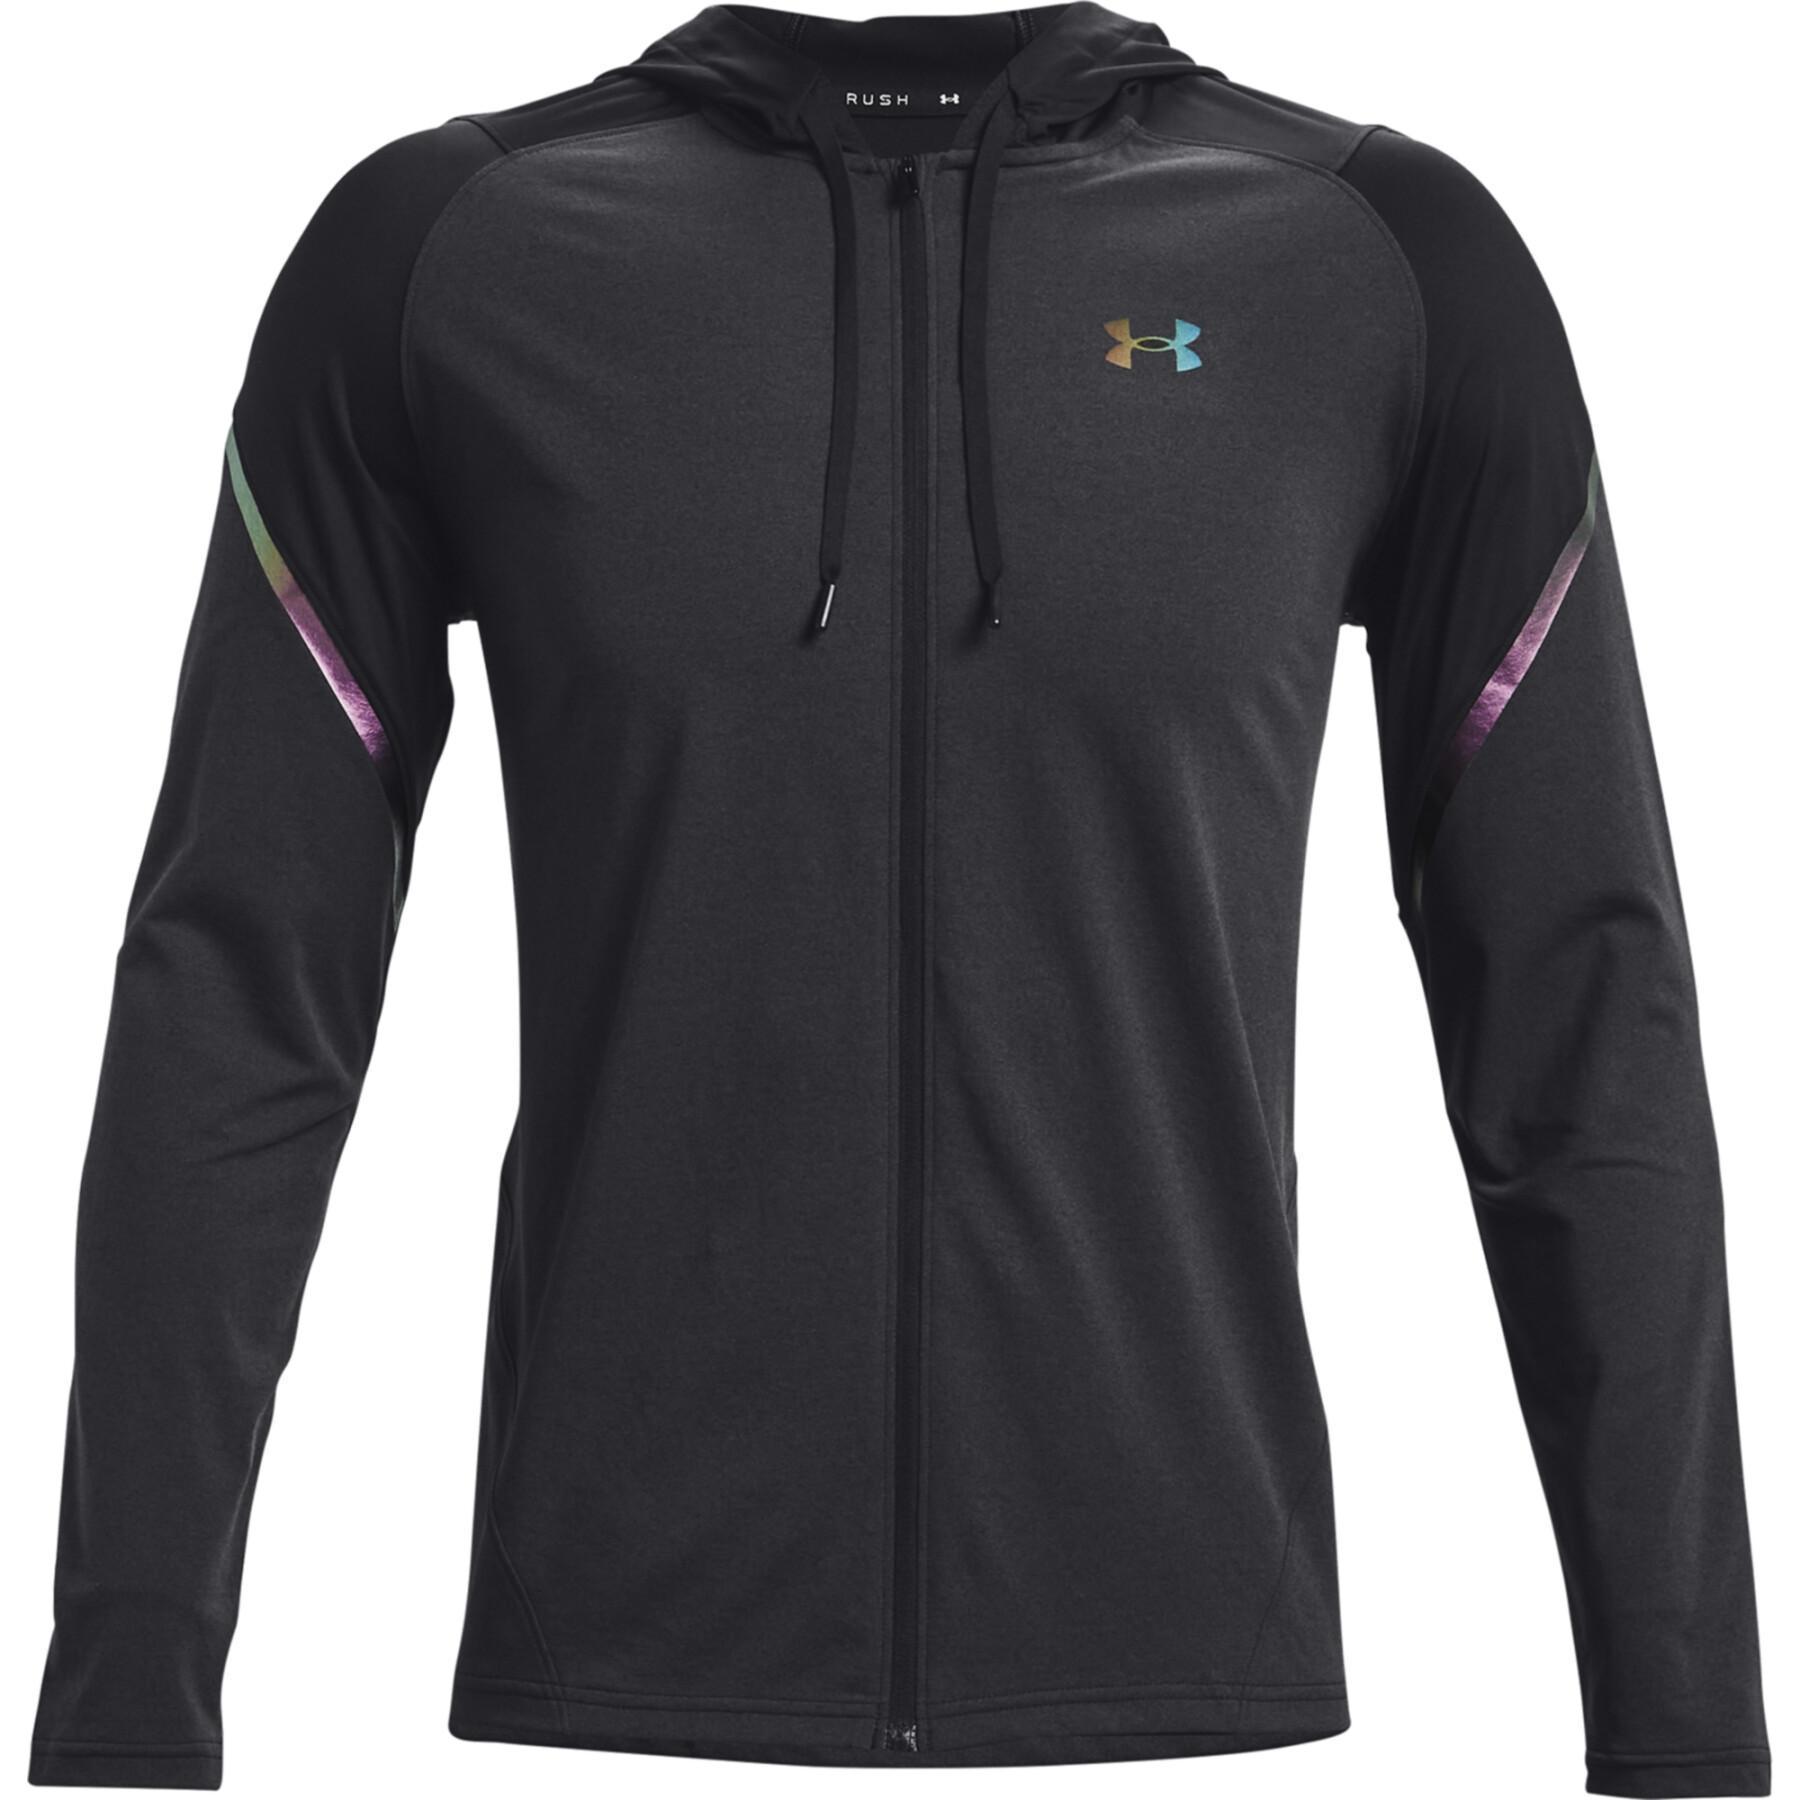 Hooded jacket Under Armour RUSH™